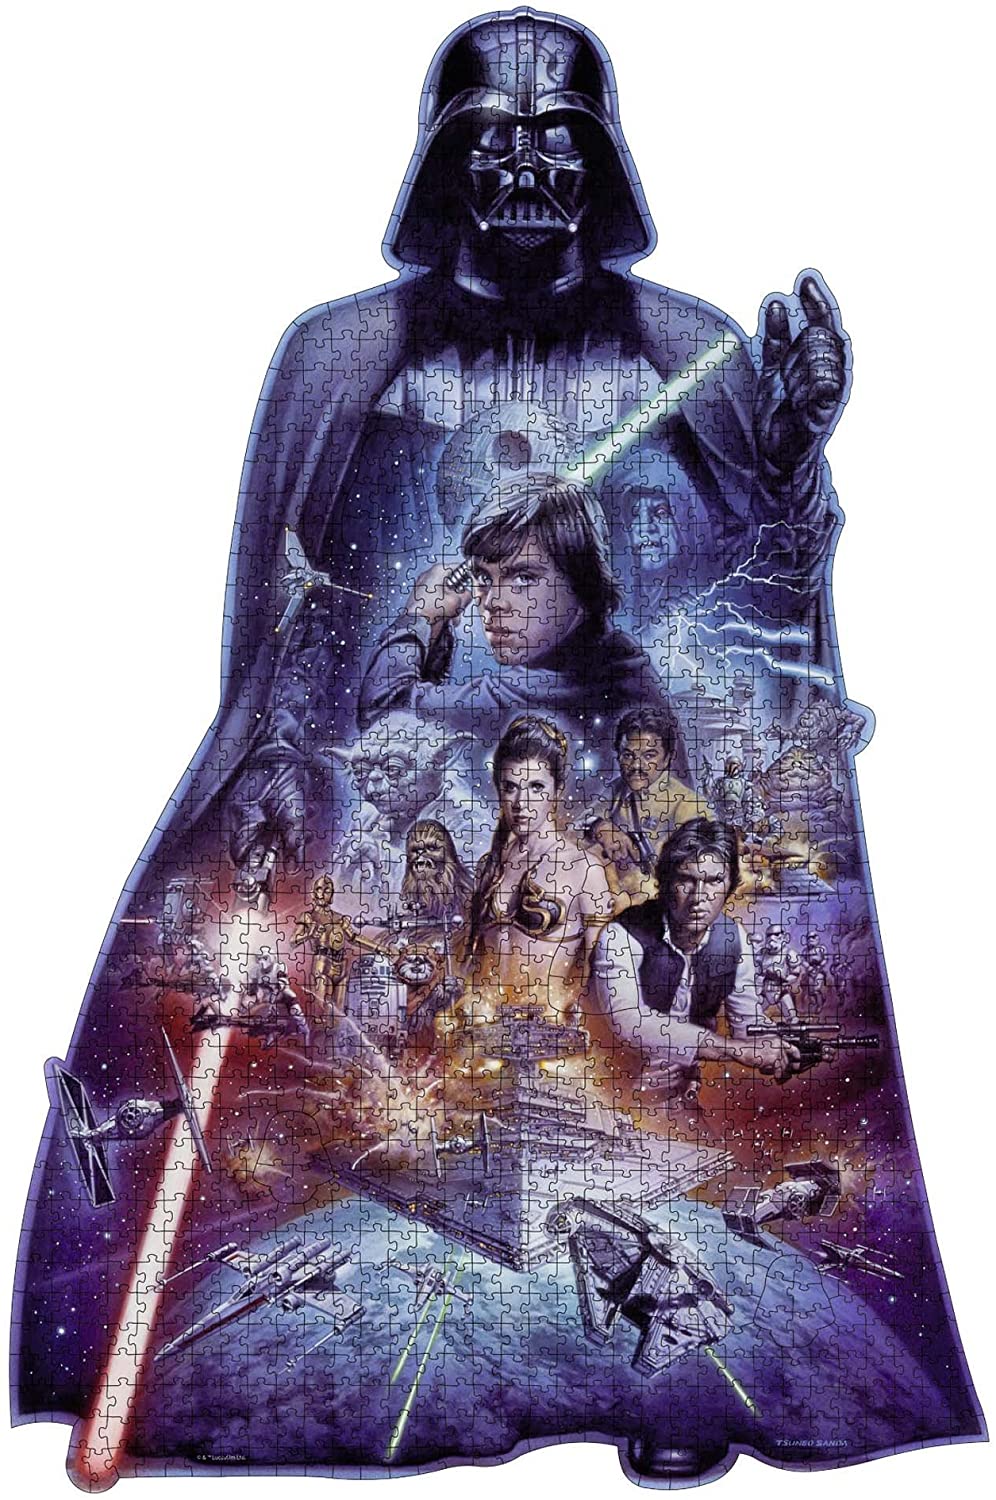 Ravensburger Puzzle – Star Wars: Darth Vader Silhouette (1098 Pieces)